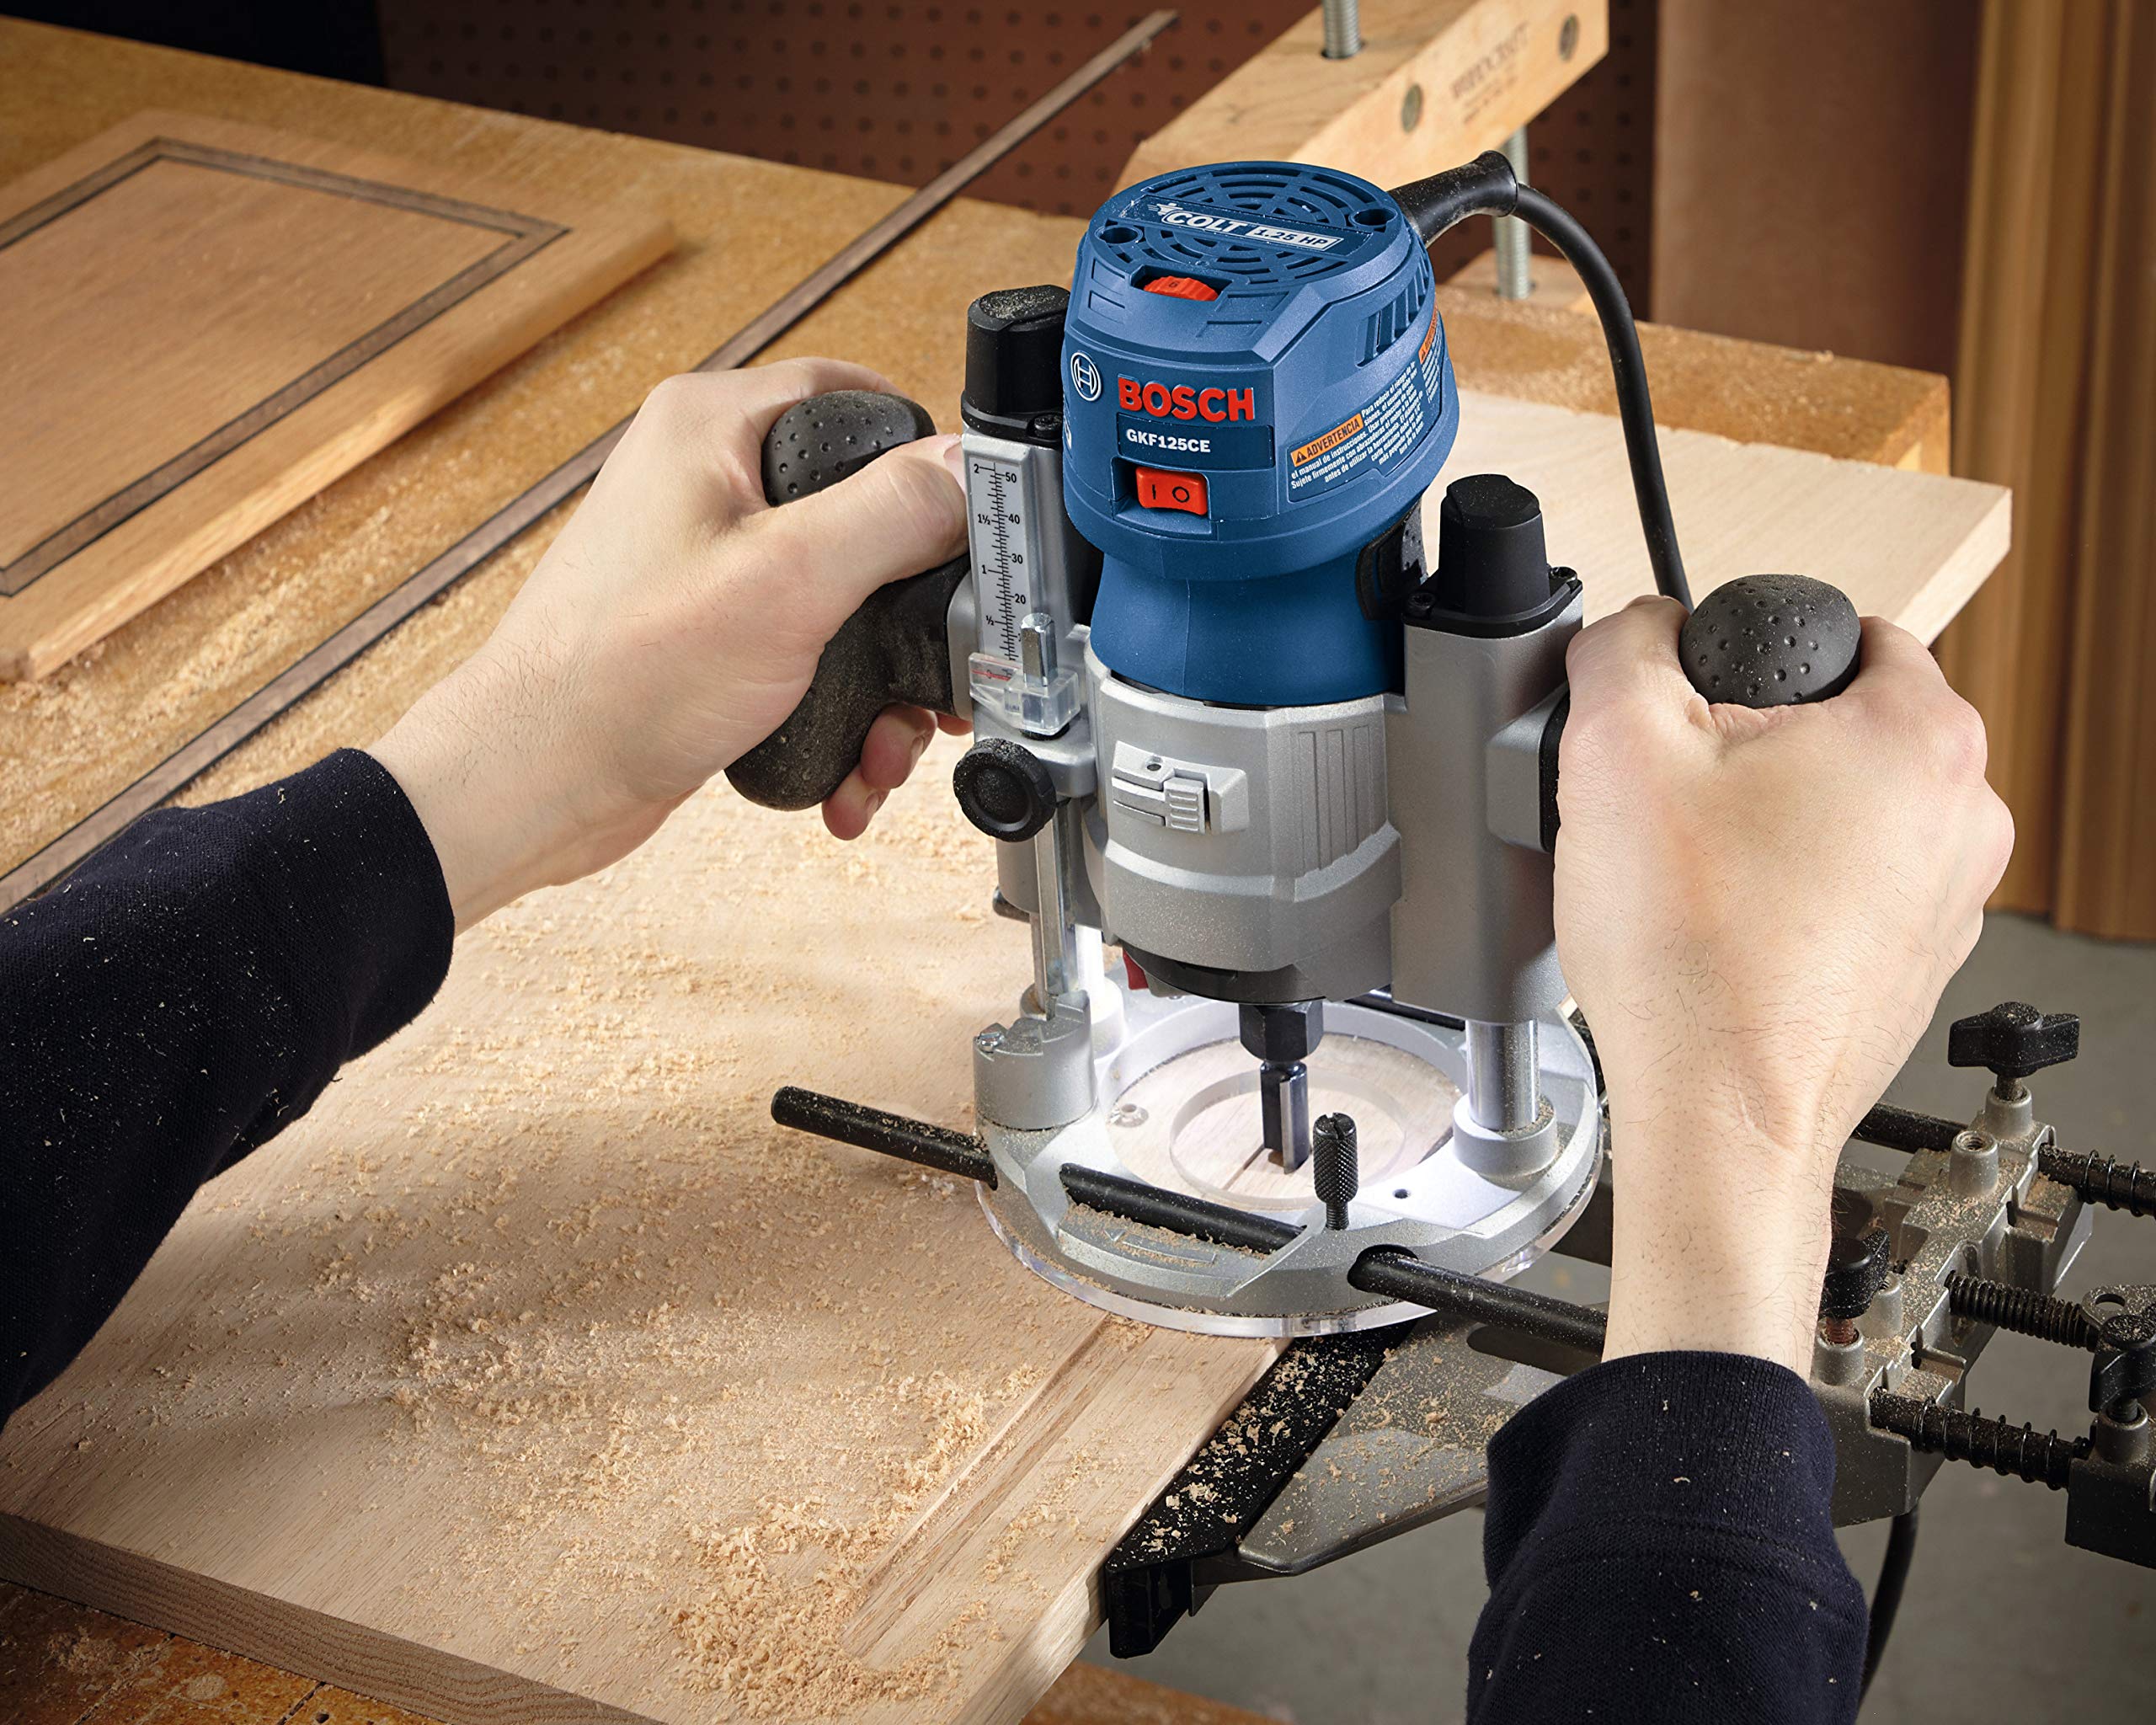 Bosch GKF125CEPK Colt 1.25 HP (Max) Variable-Speed Palm Router